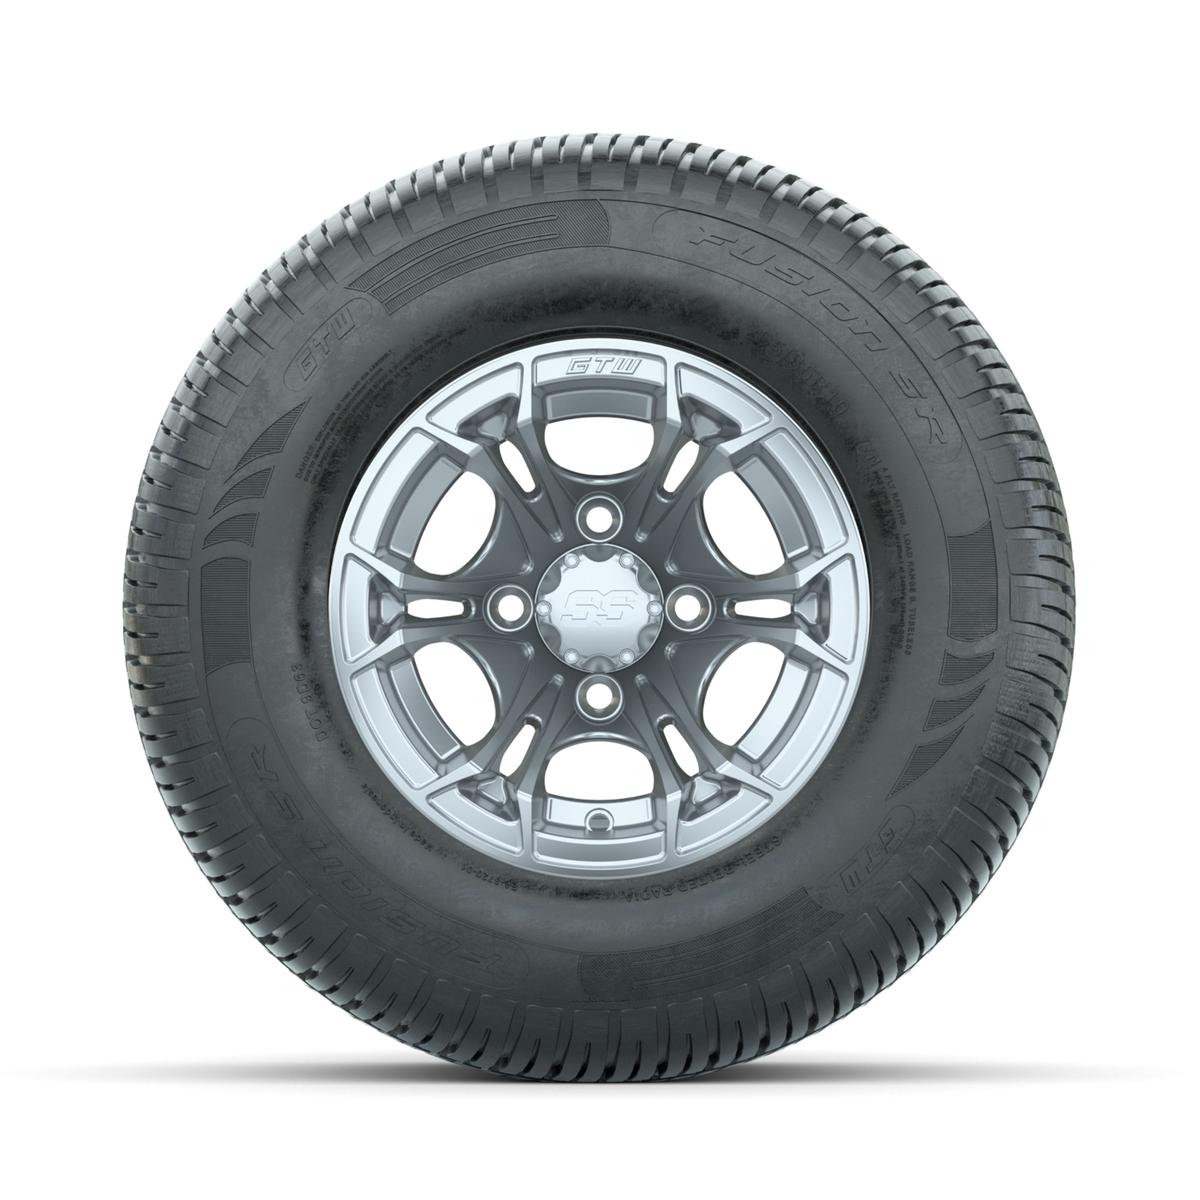 GTW Spyder Silver Brush 10 in Wheels with 205/65-R10 Fusion SR Steel Belted Radial Tires – Full Set